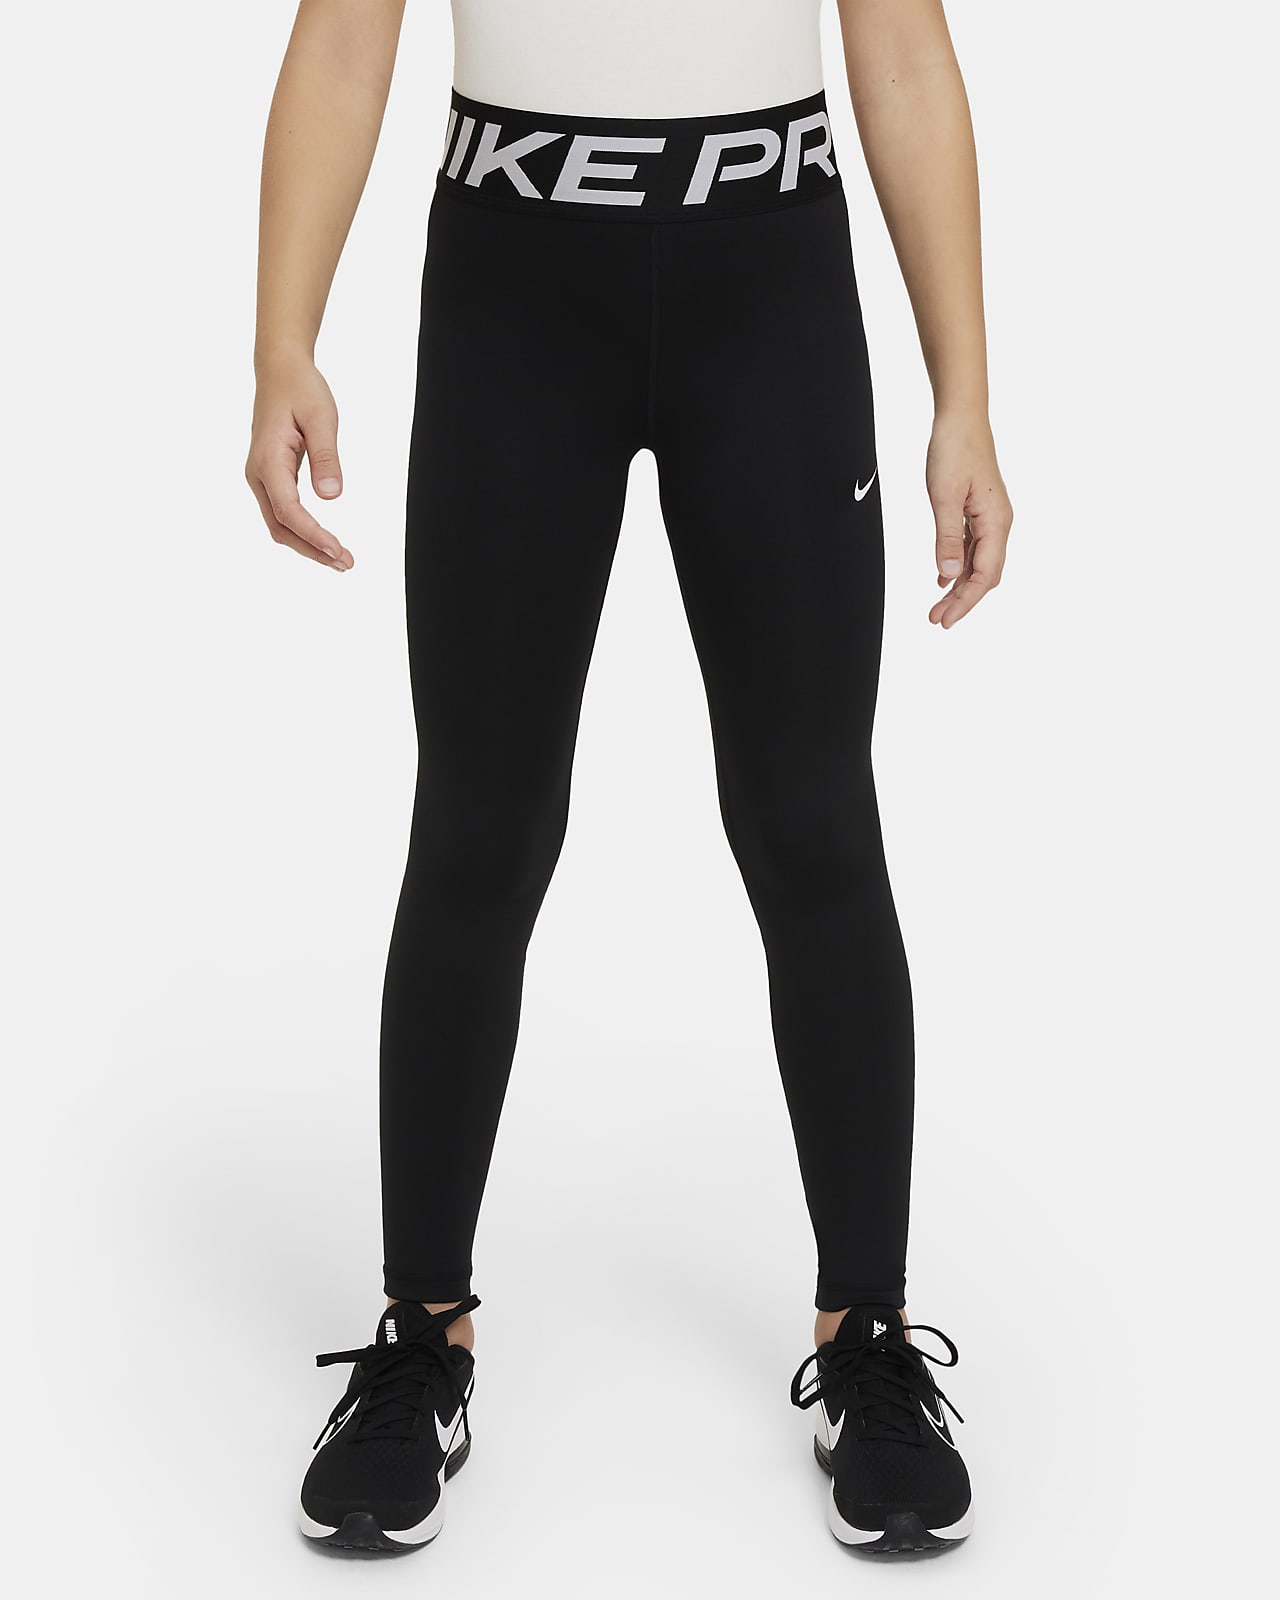 https://static.nike.com/a/images/t_PDP_1280_v1/f_auto,q_auto:eco/940d2d33-866d-457e-b185-68c86ca3b5f9/leggings-dri-fit-pro-S62Czb.png